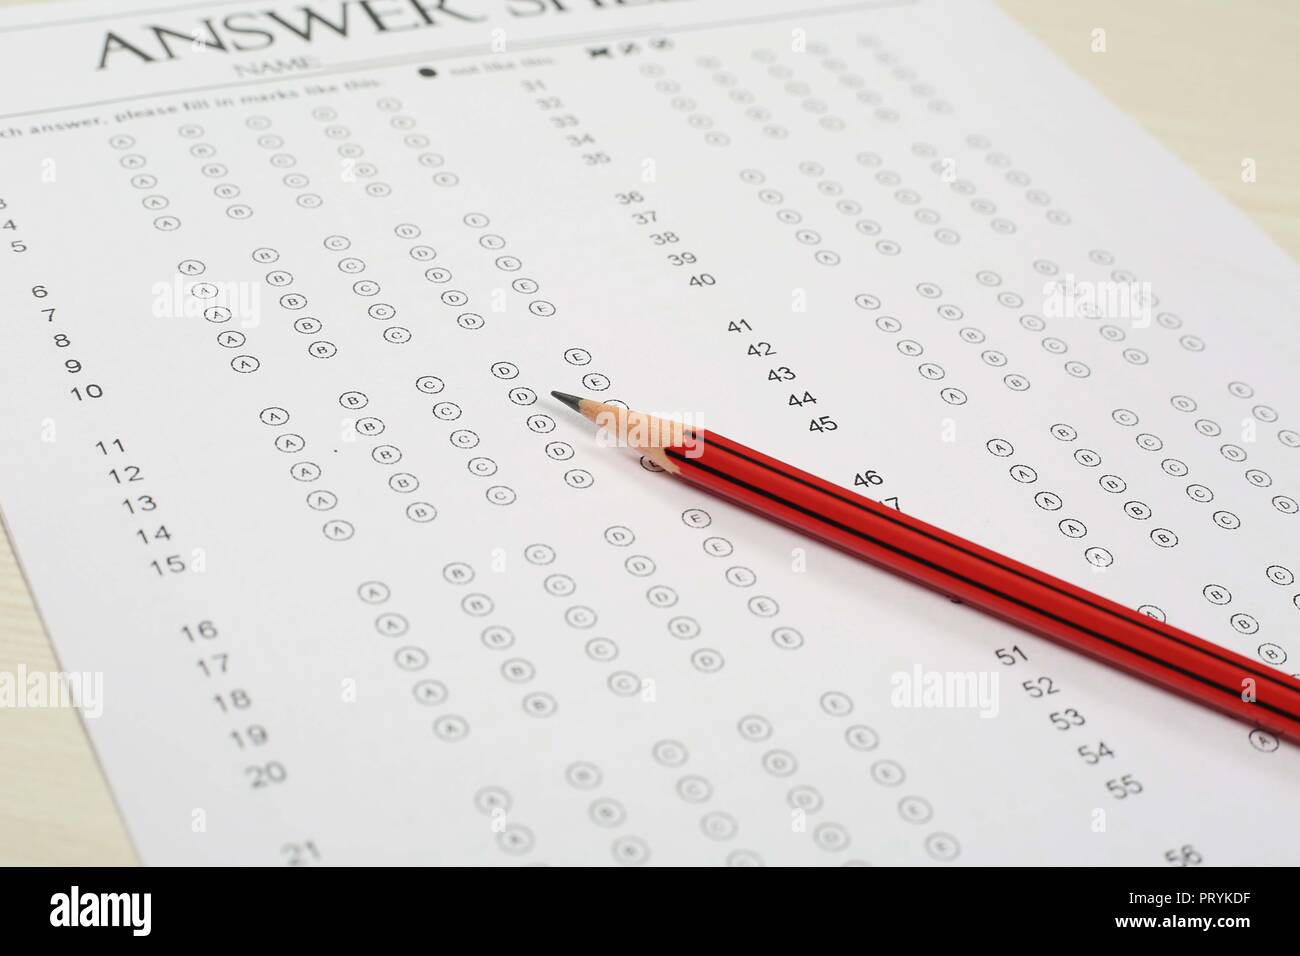 Picture of blank omr sheet and pencil. Stock Photo